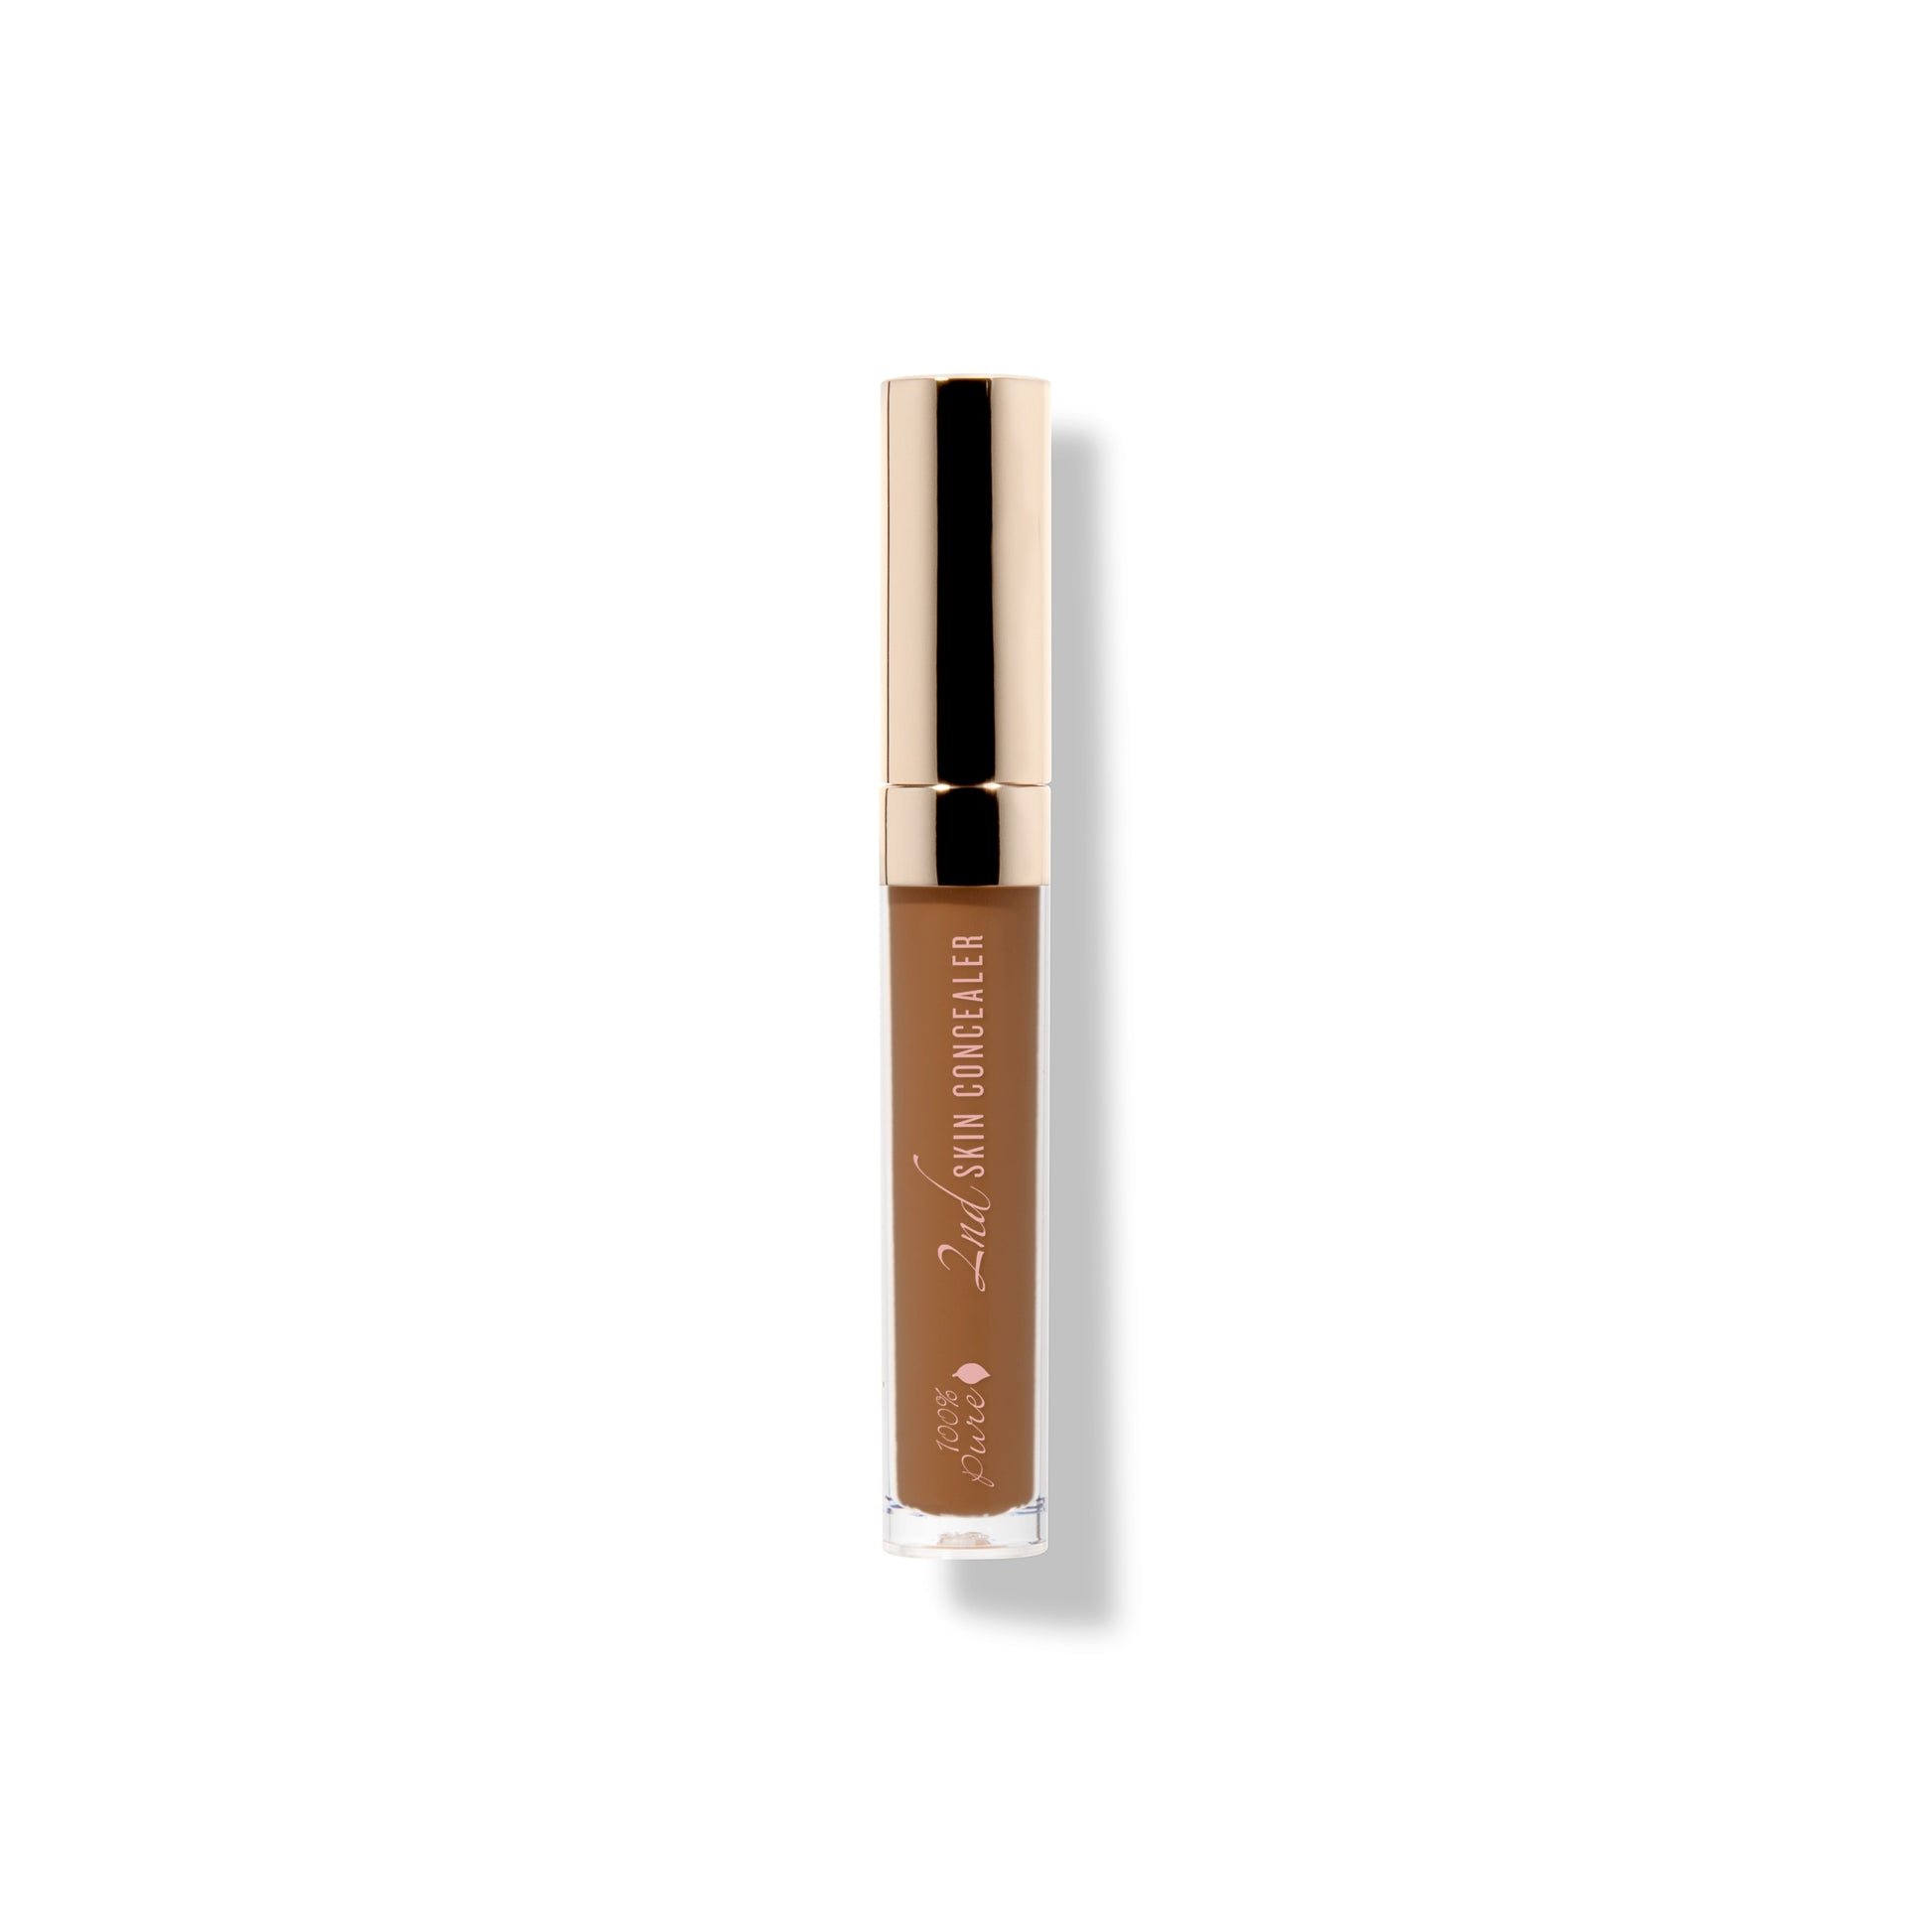 100% PURE Fruit Pigmented 2nd Skin Concealer shade 7